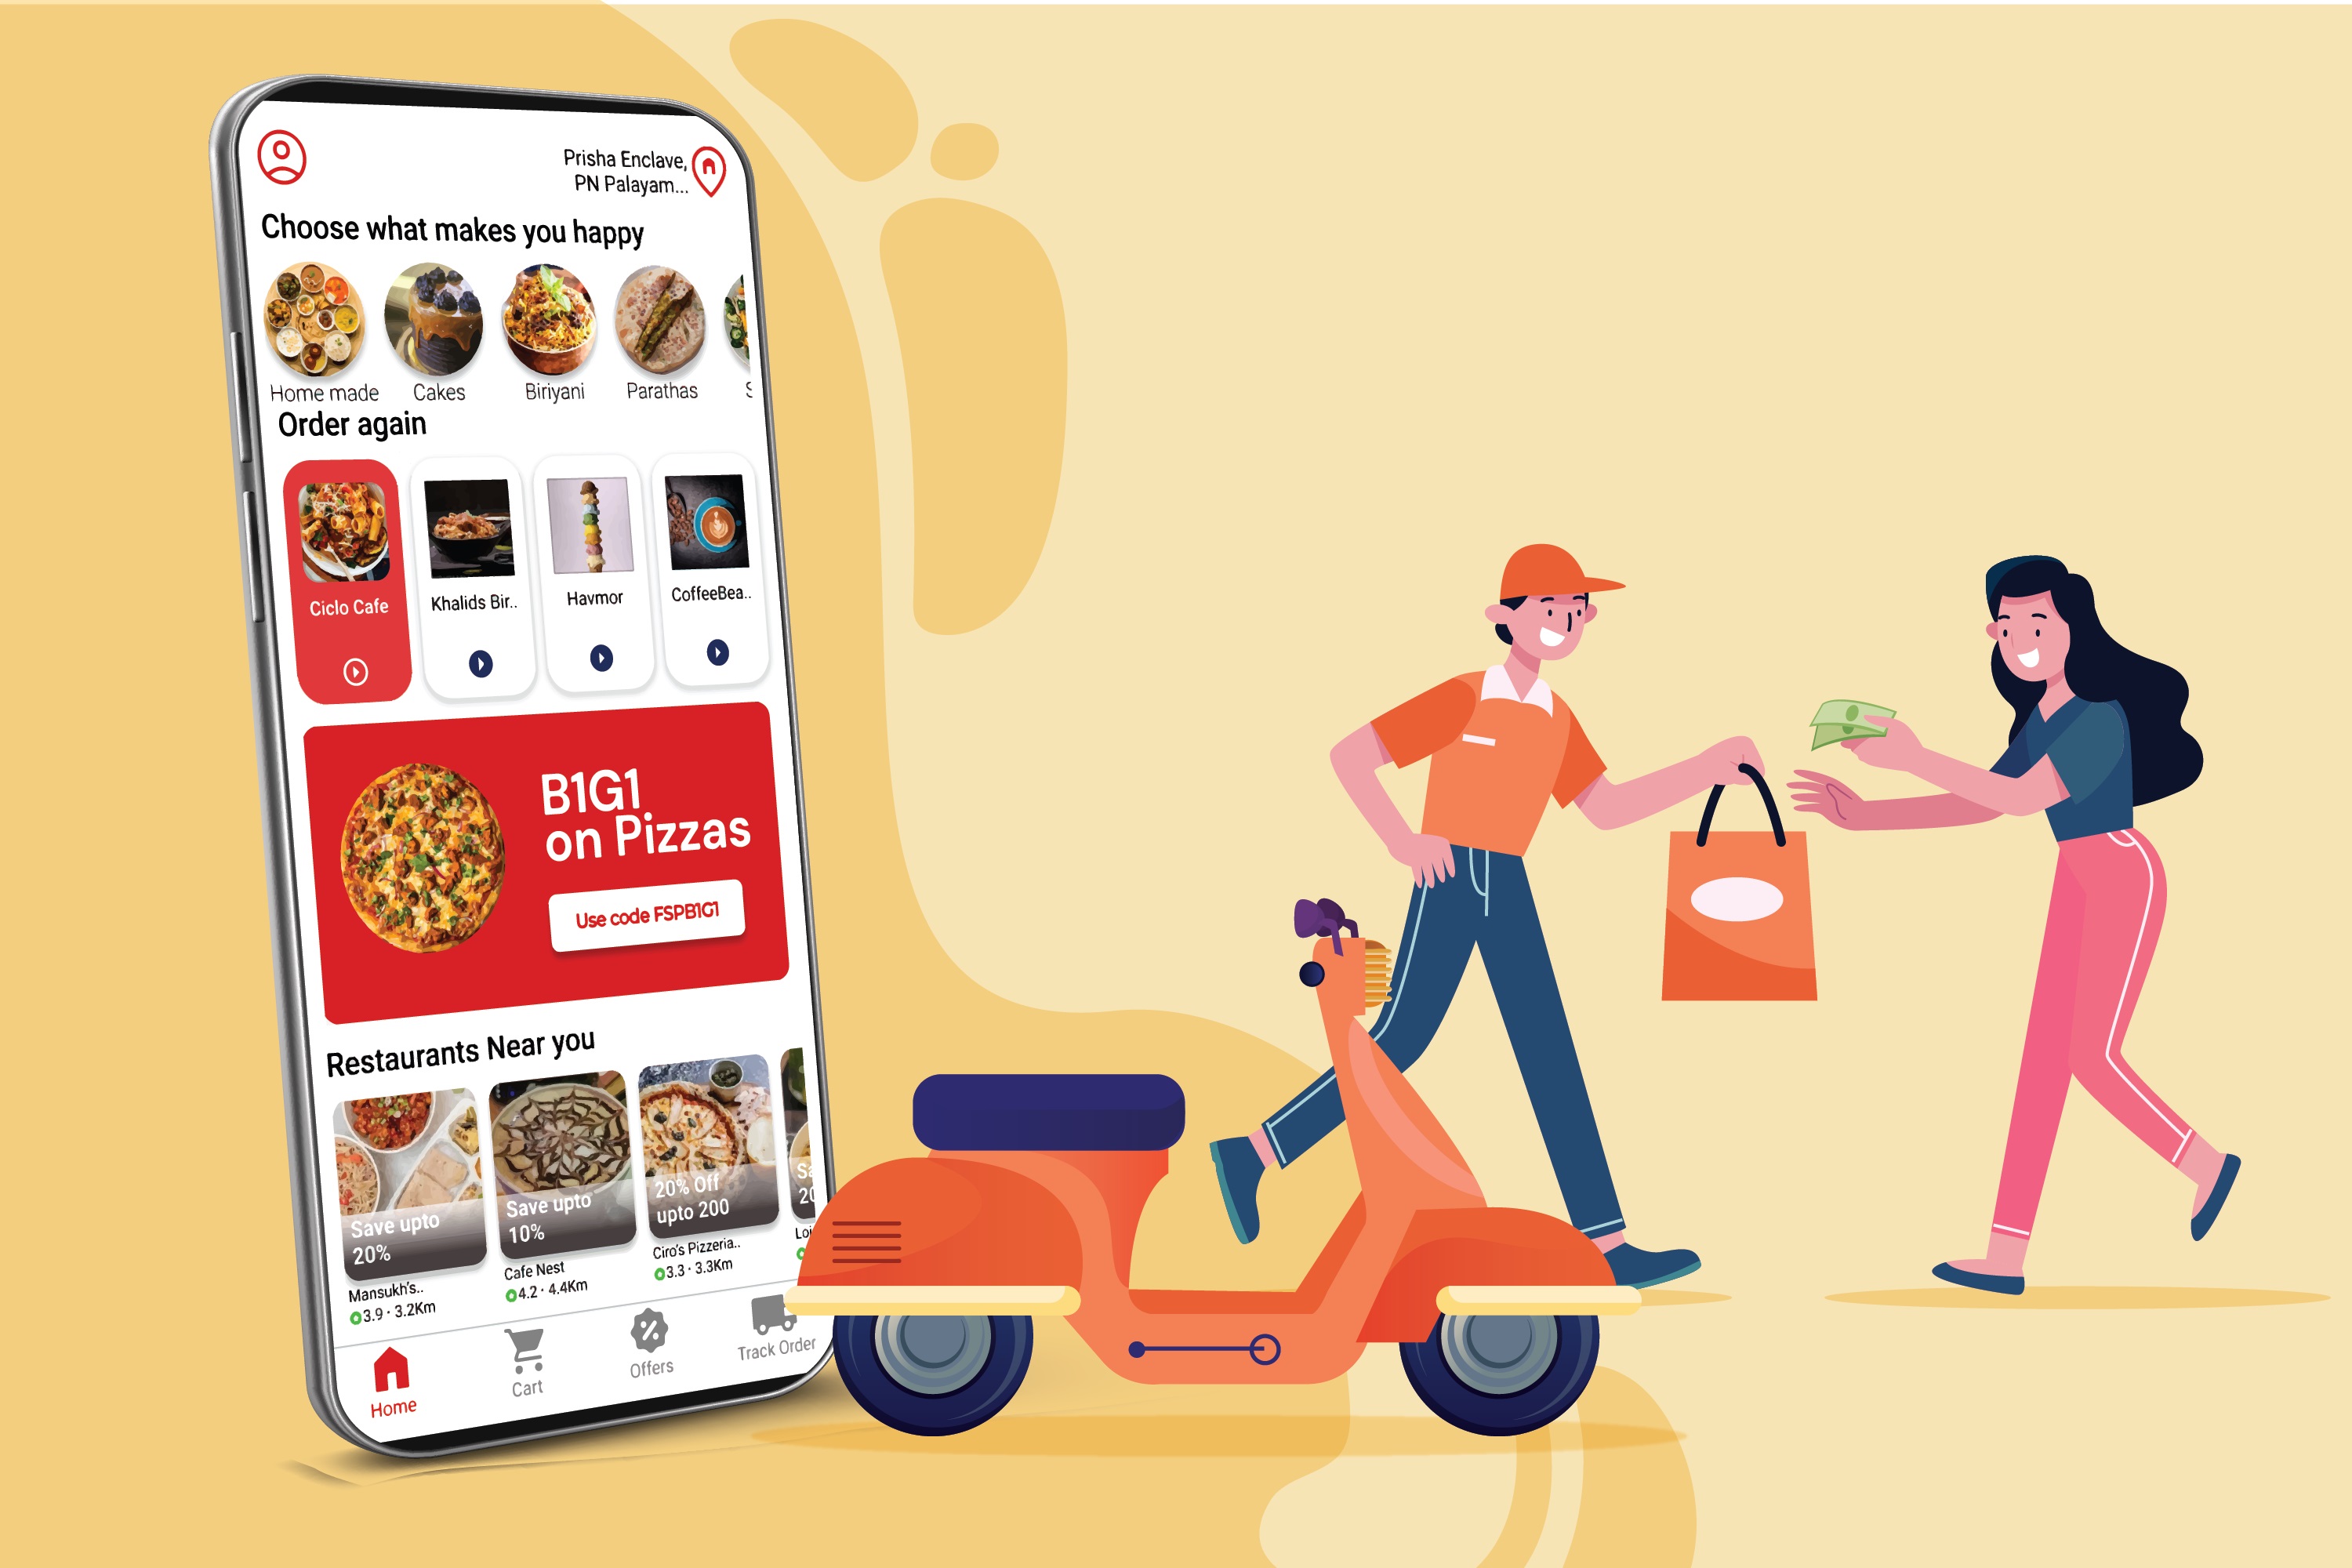 Online Takeaway and Food Delivery Market to See Huge Growth | DoorDash, Ubereats, Domino's Pizza